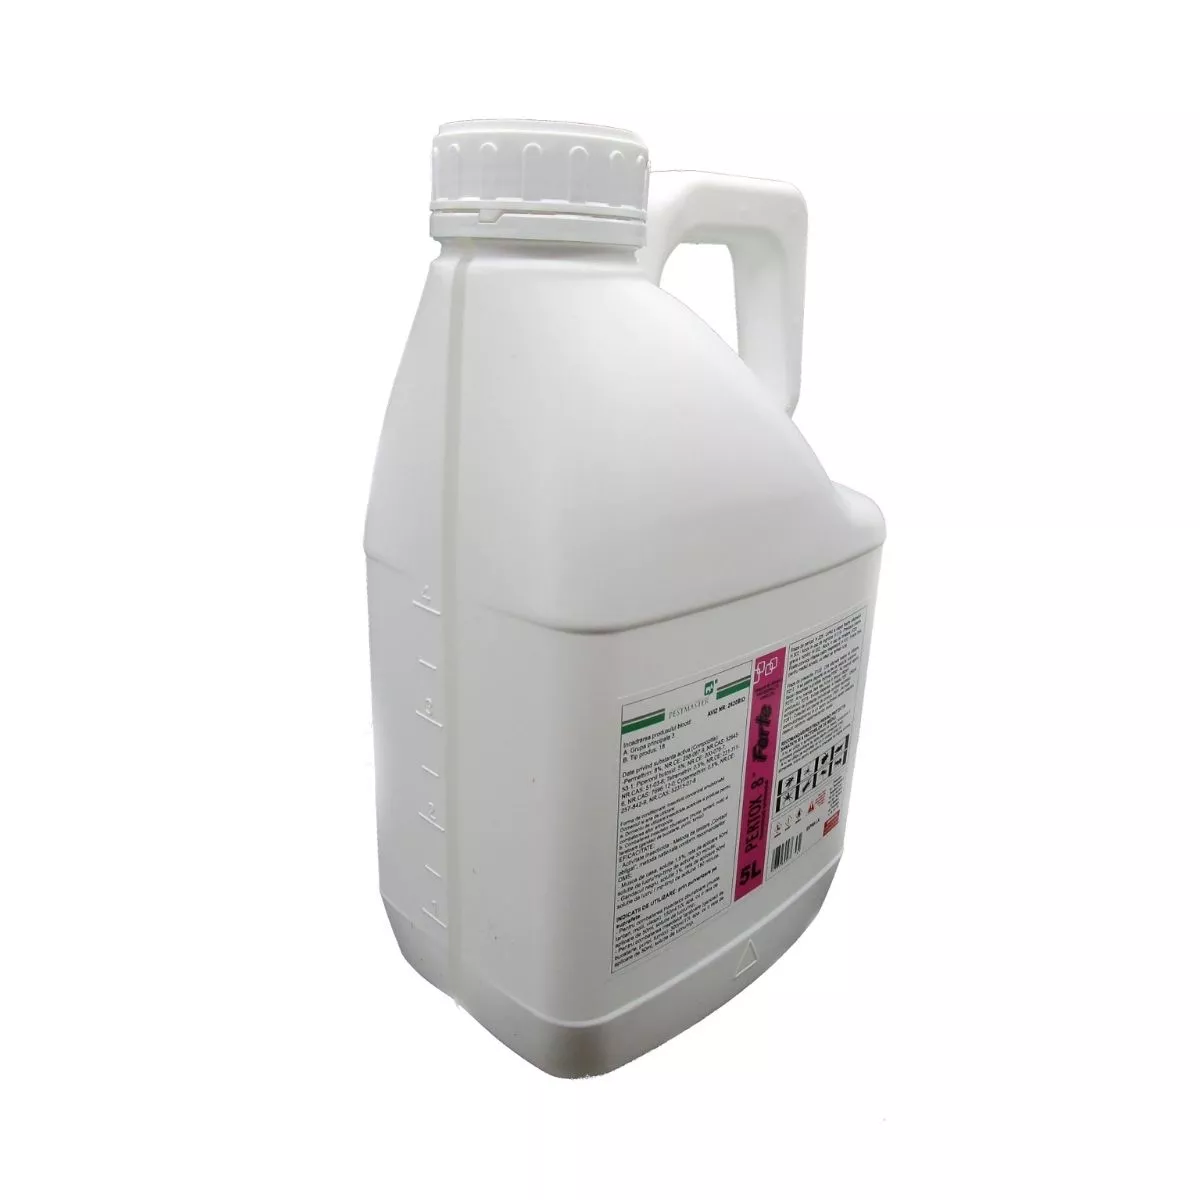 Insecticid concentrat PERTOX 8 FORTE 5 L ,Pestmaster 2